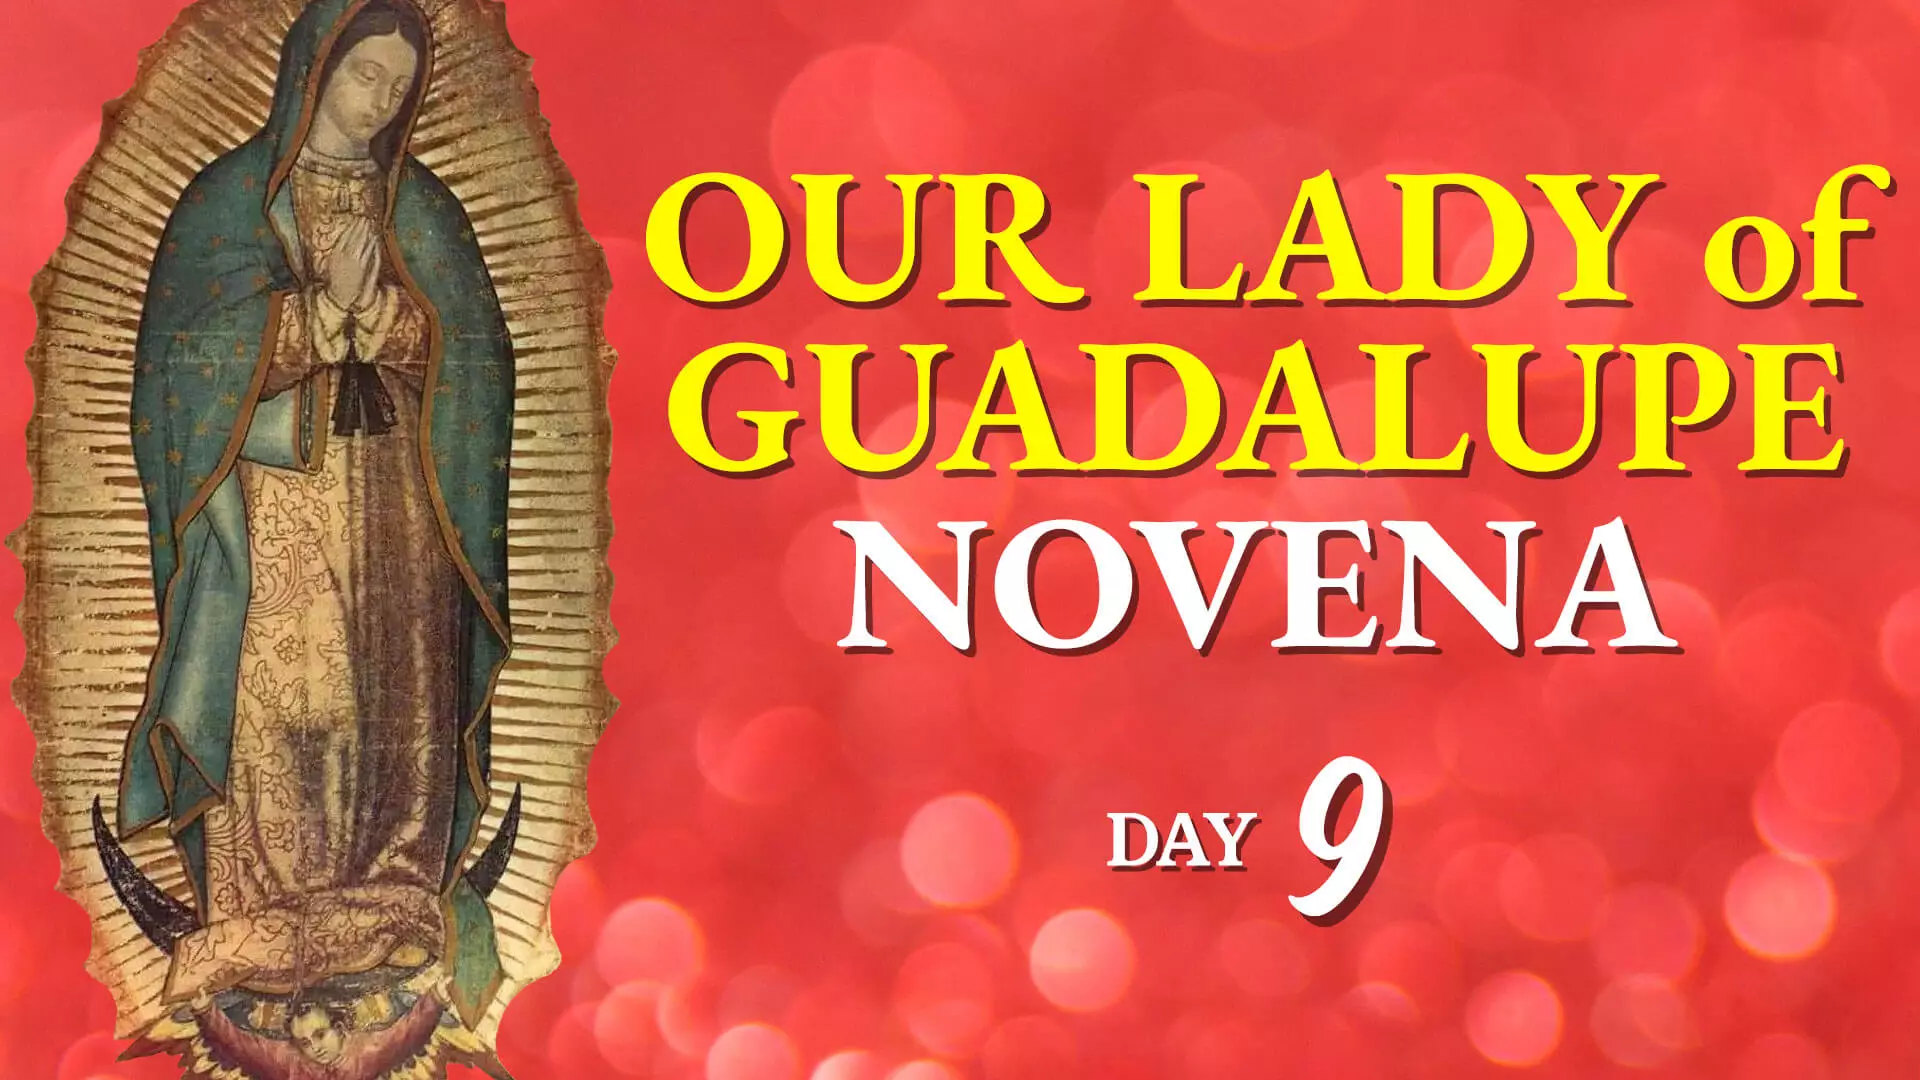 Our Lady of Guadalupe Novena Day 9